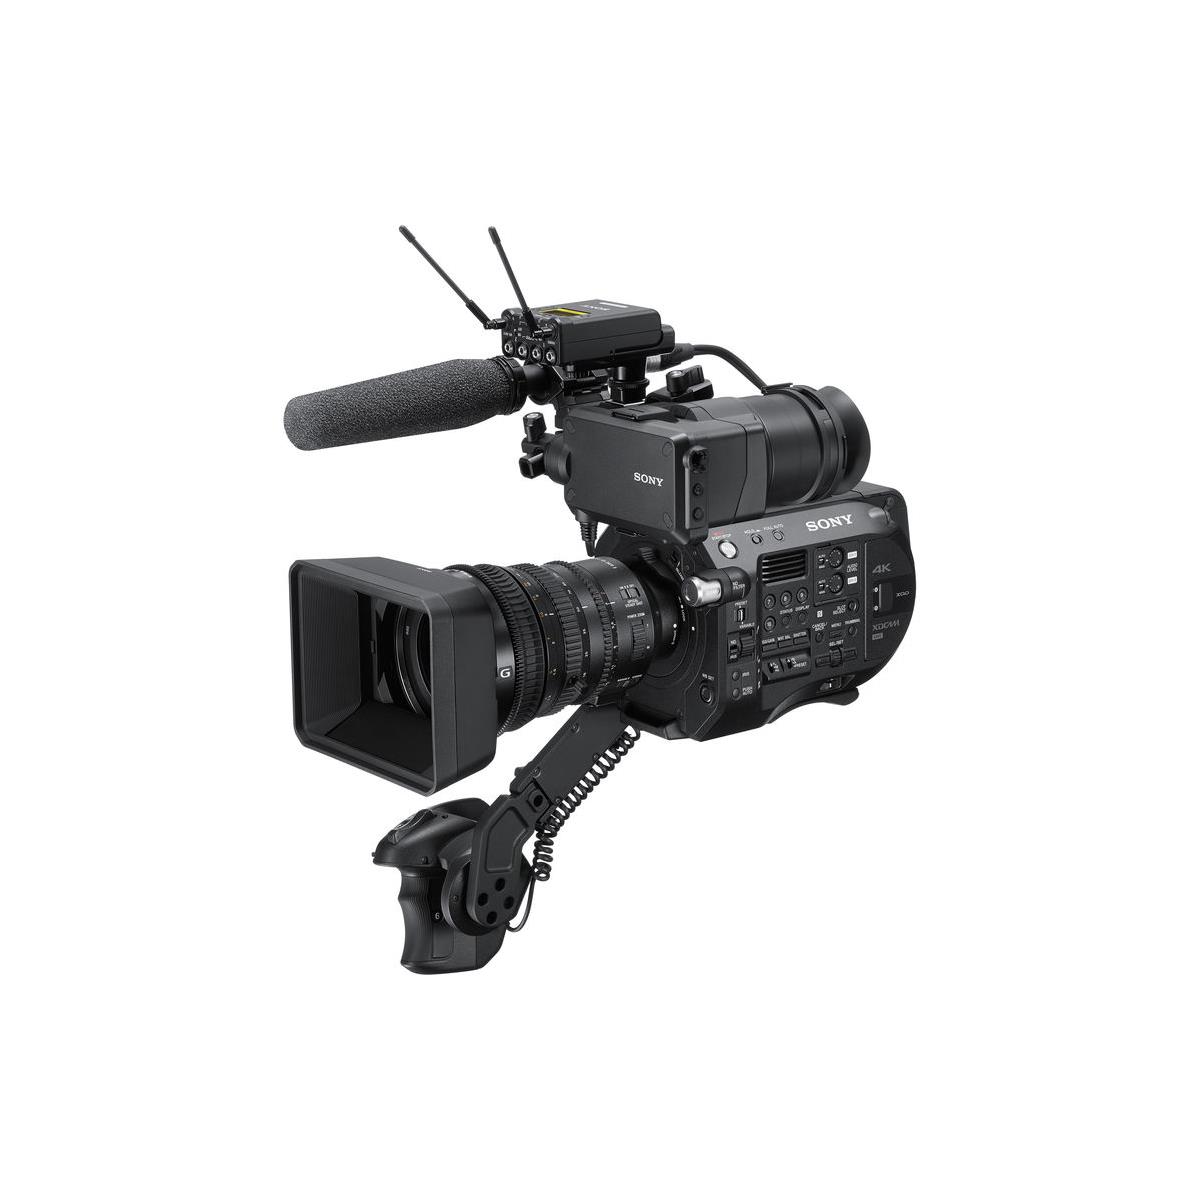 Sony PXW-FS7M2 4K XDCAM Super 35  Camcorder Kit with 18-110mm Zoom Lens